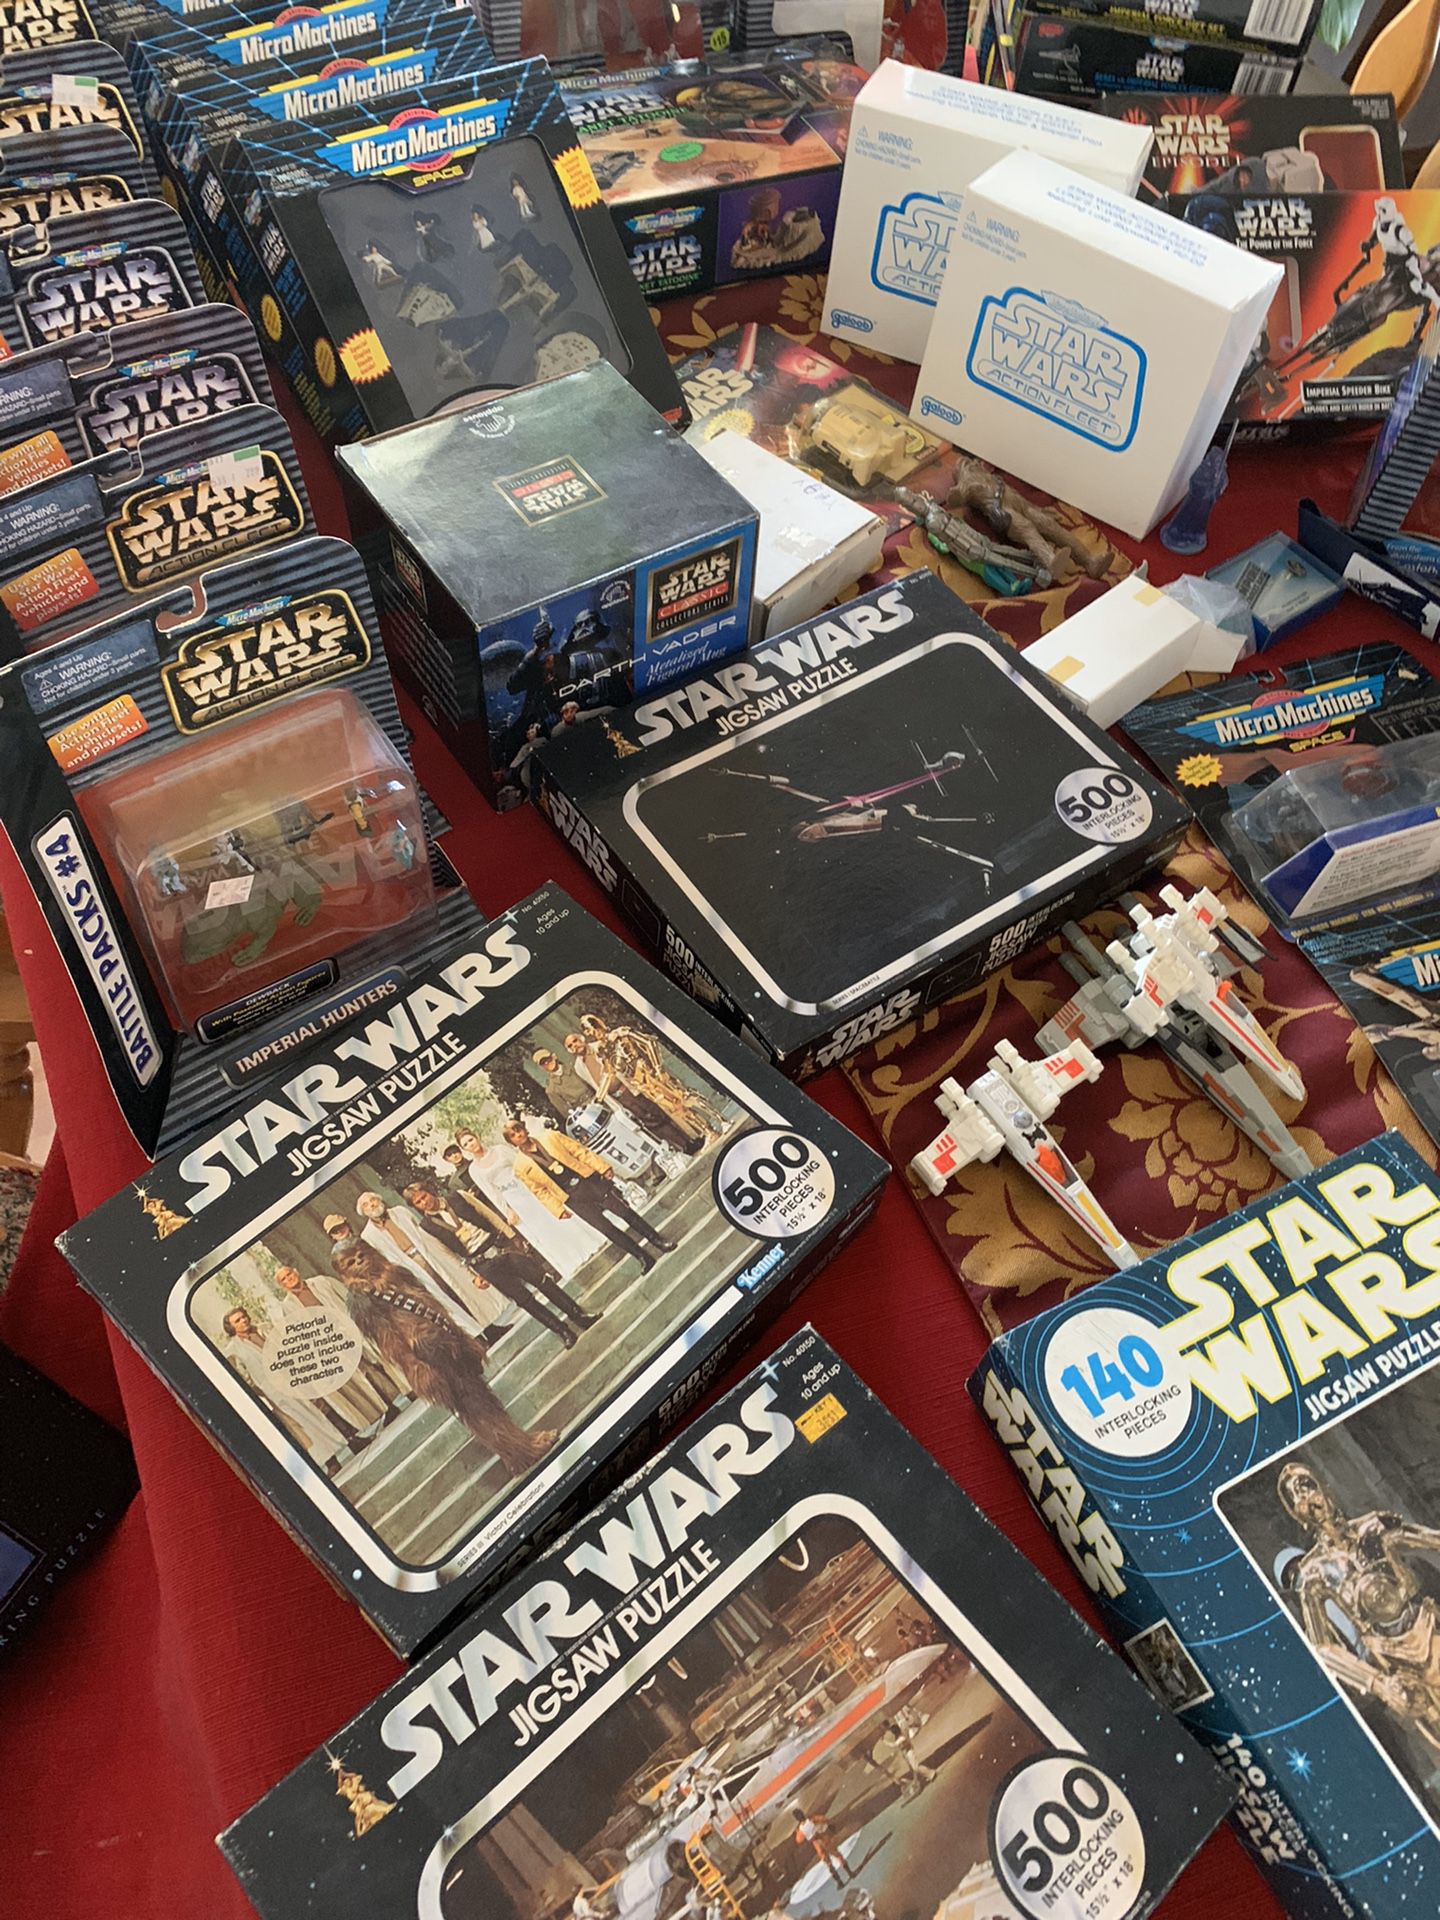 Star Wars for sale.